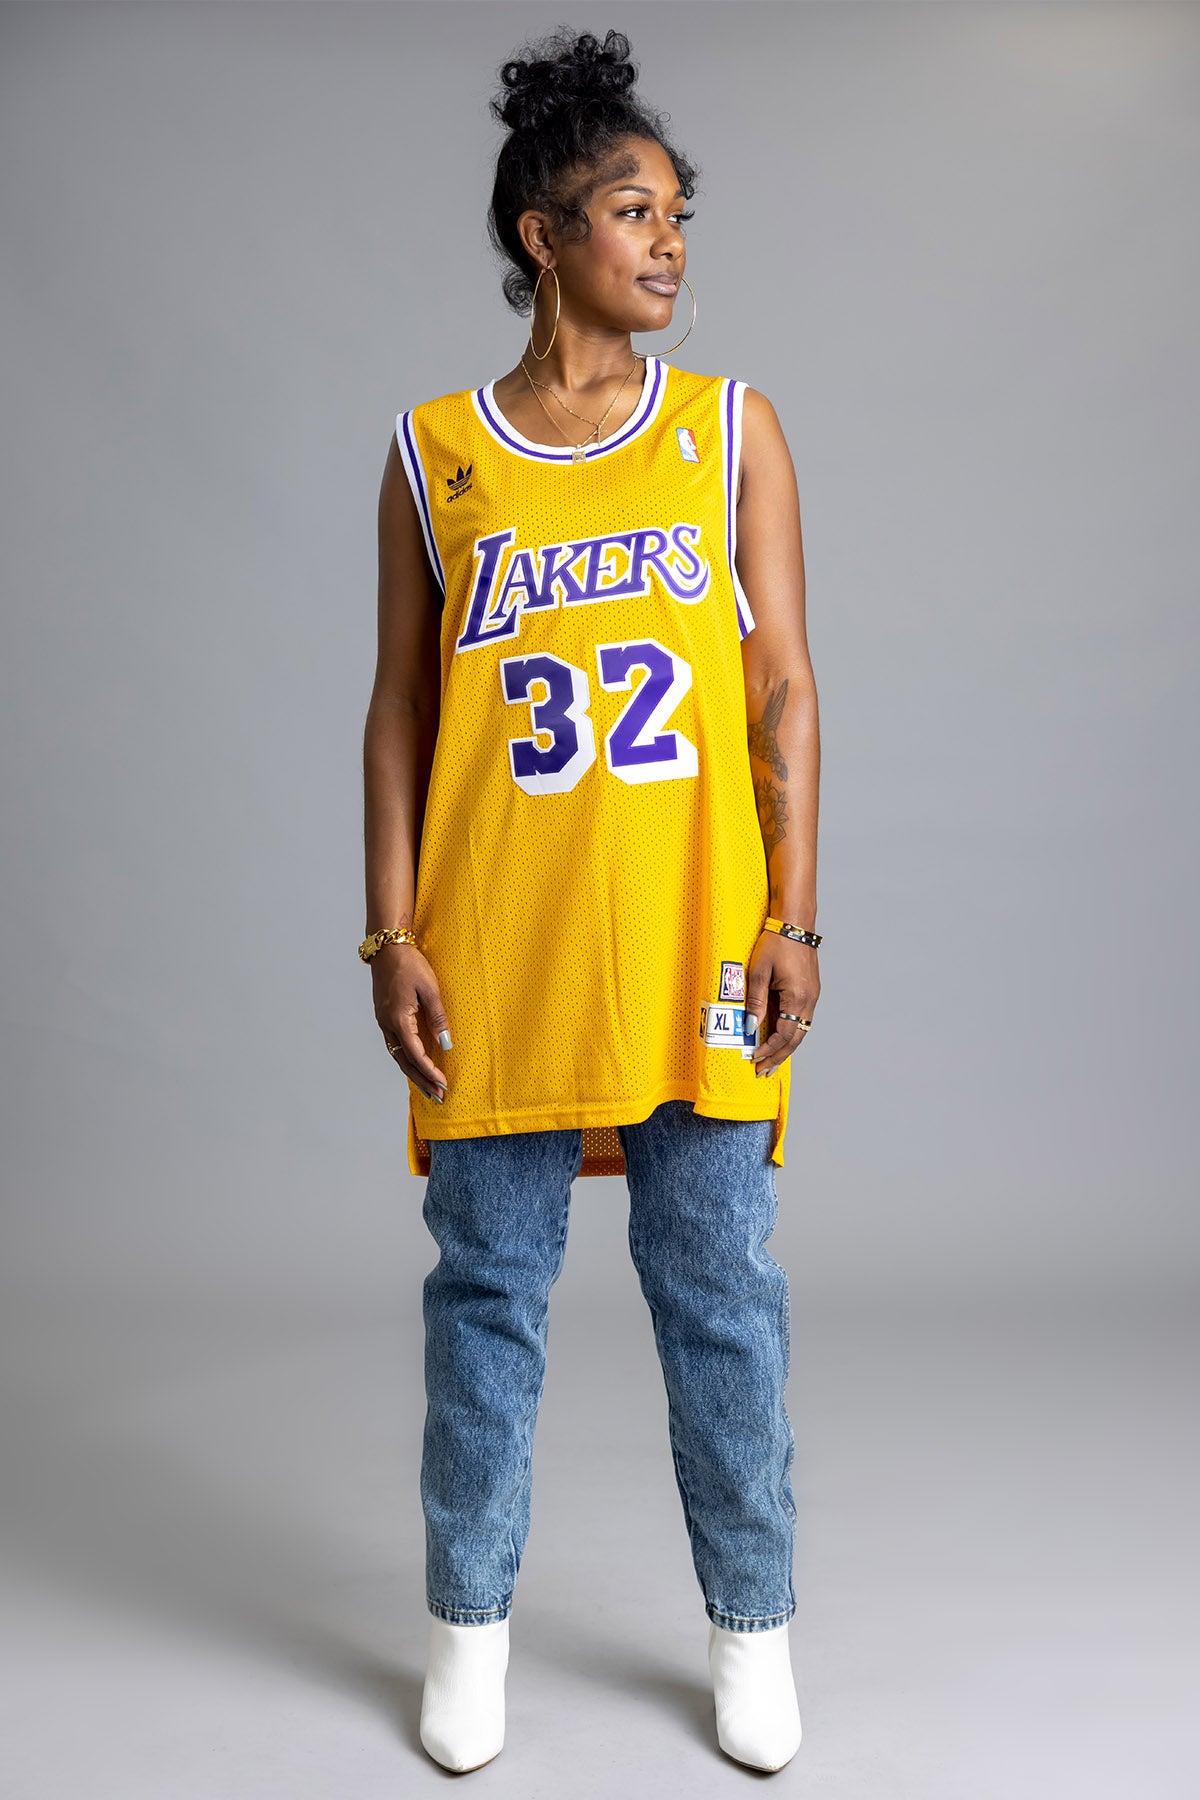 Buy NBA LOS ANGELES LAKERS BASEBALL JERSEY for N/A 0.0 on !